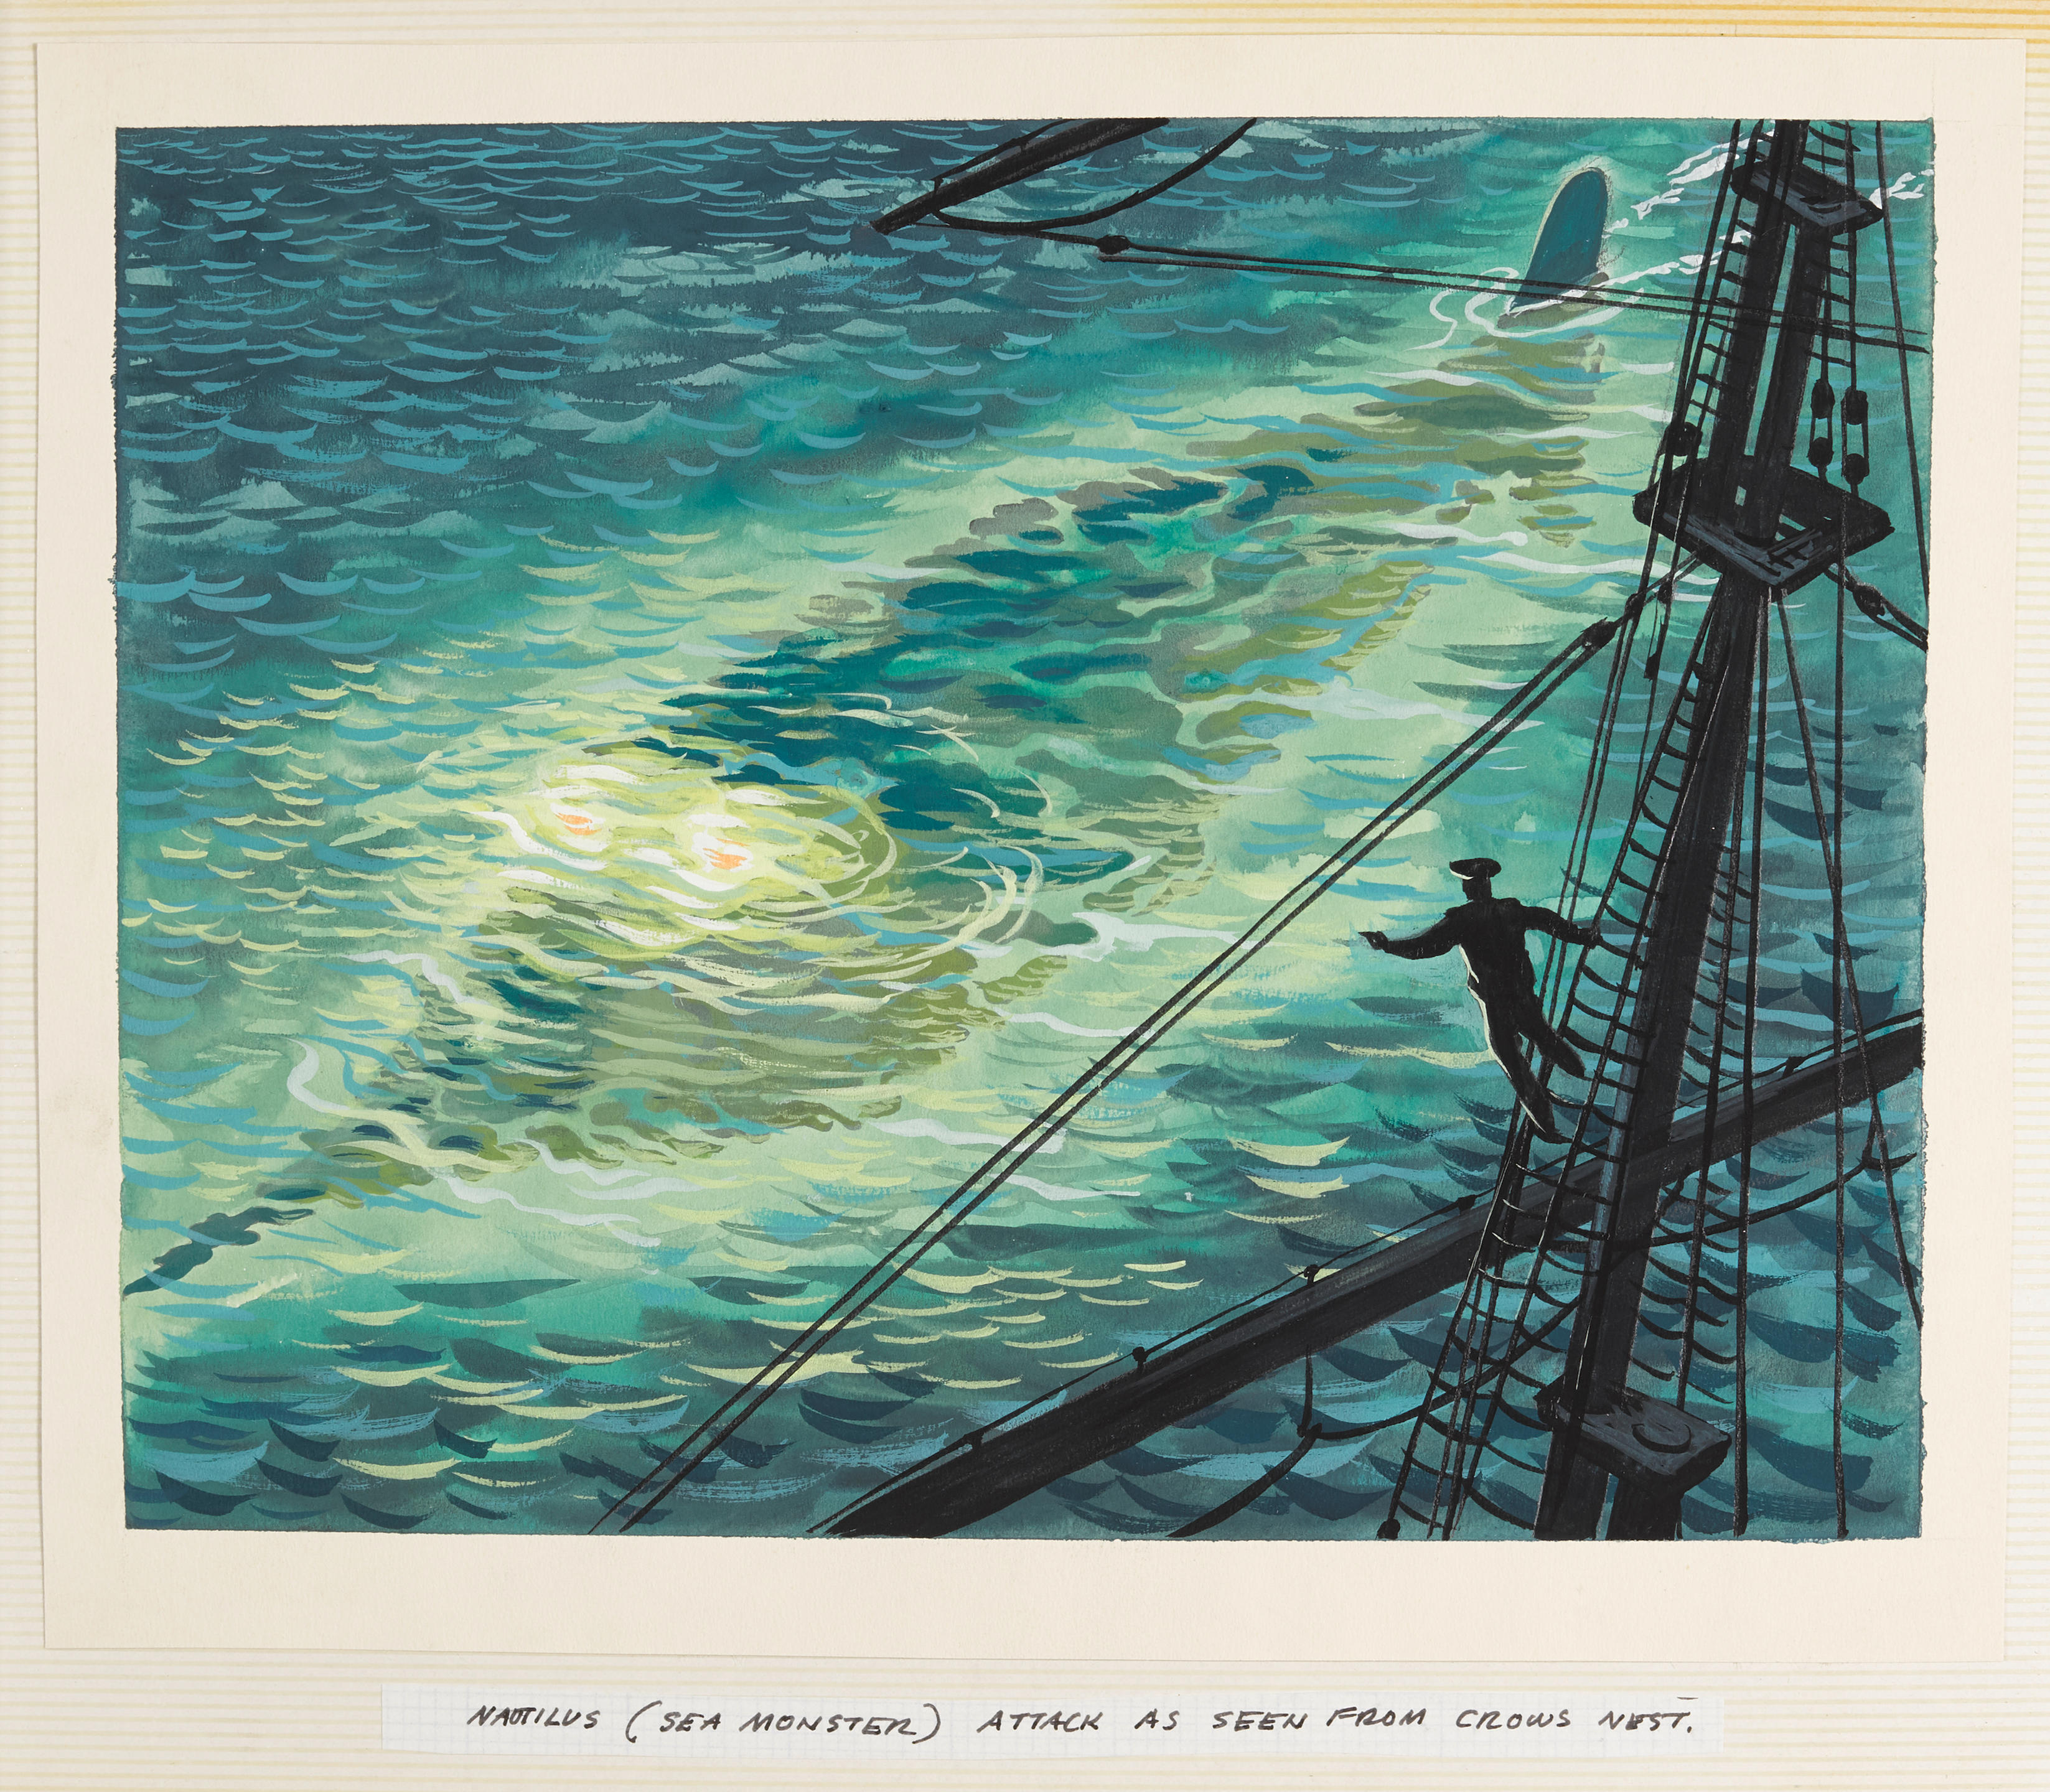 A Harper Goff scrapbook pertaining to 20,000 Leagues Under the Sea